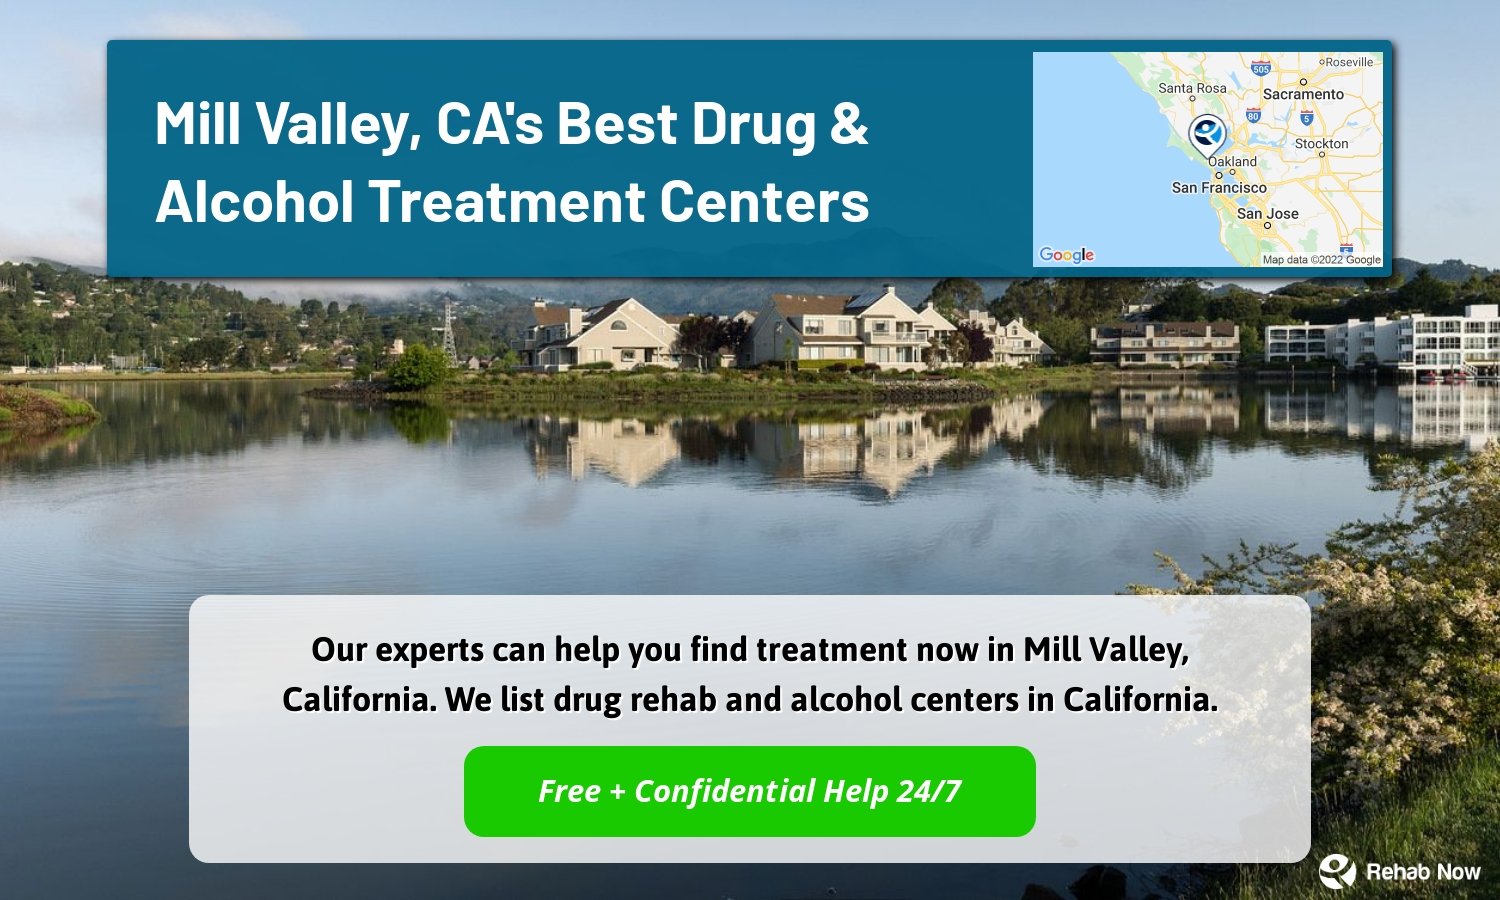 Our experts can help you find treatment now in Mill Valley, California. We list drug rehab and alcohol centers in California.